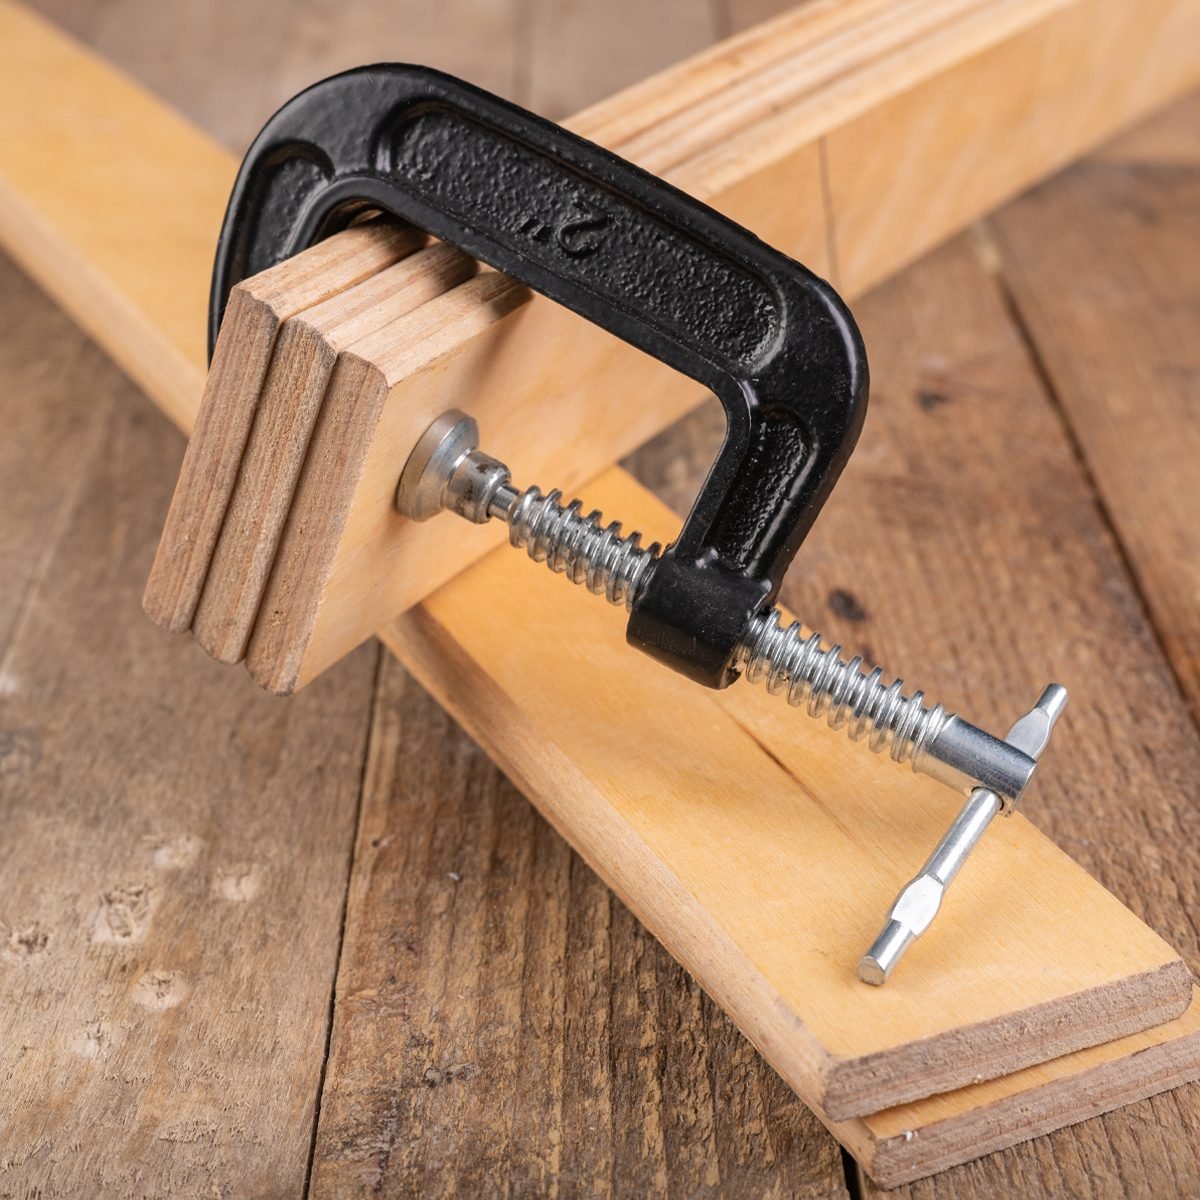 https://www.familyhandyman.com/wp-content/uploads/2022/11/GettyImages-Carpentry-clamp-used-for-gluing-wood-1251594347-by-Piotr-Wytrazek.jpg